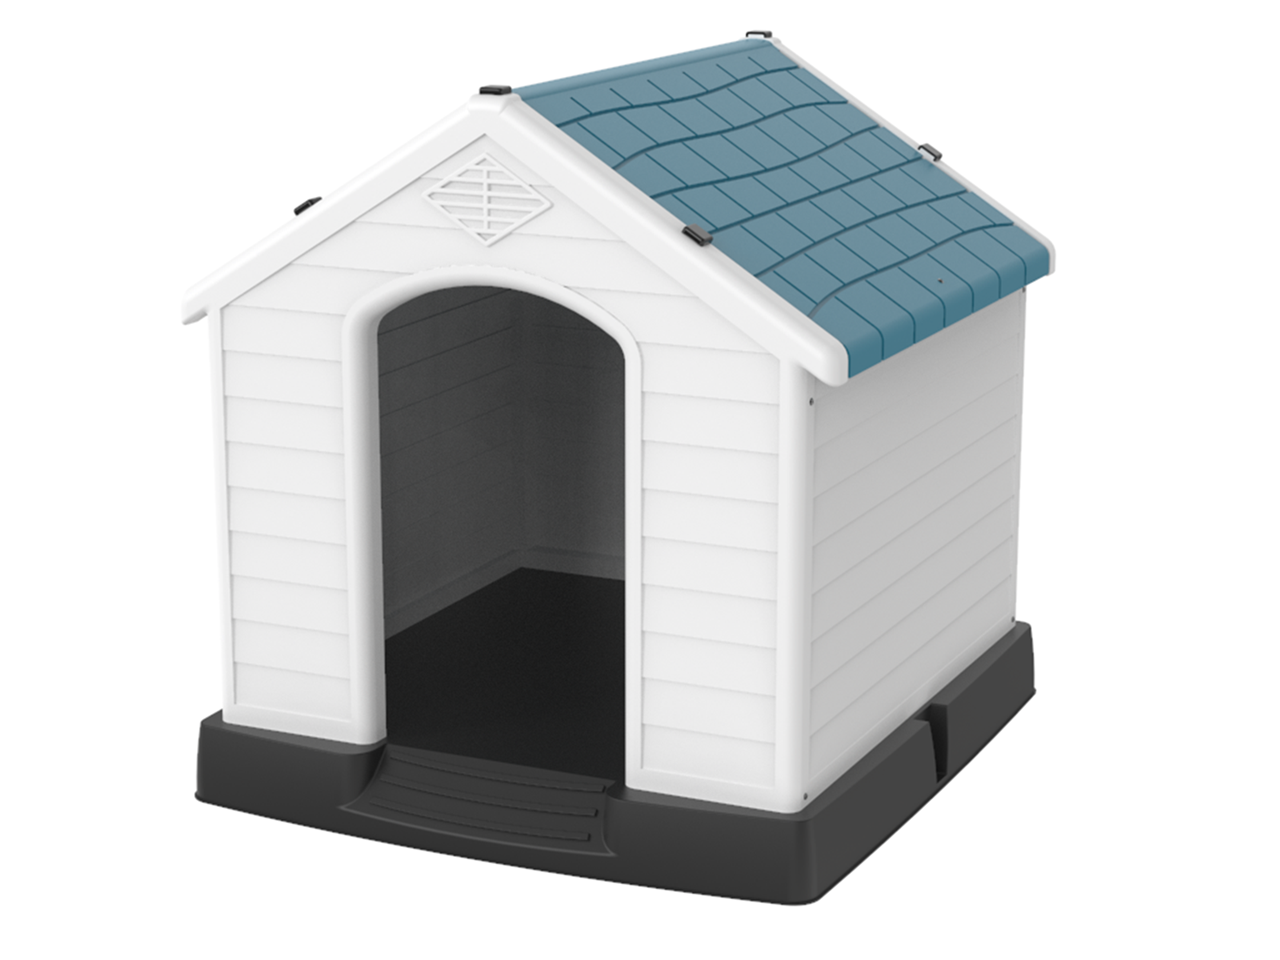  Qily Plastic Dog House Outdoor for Small Medium Dogs